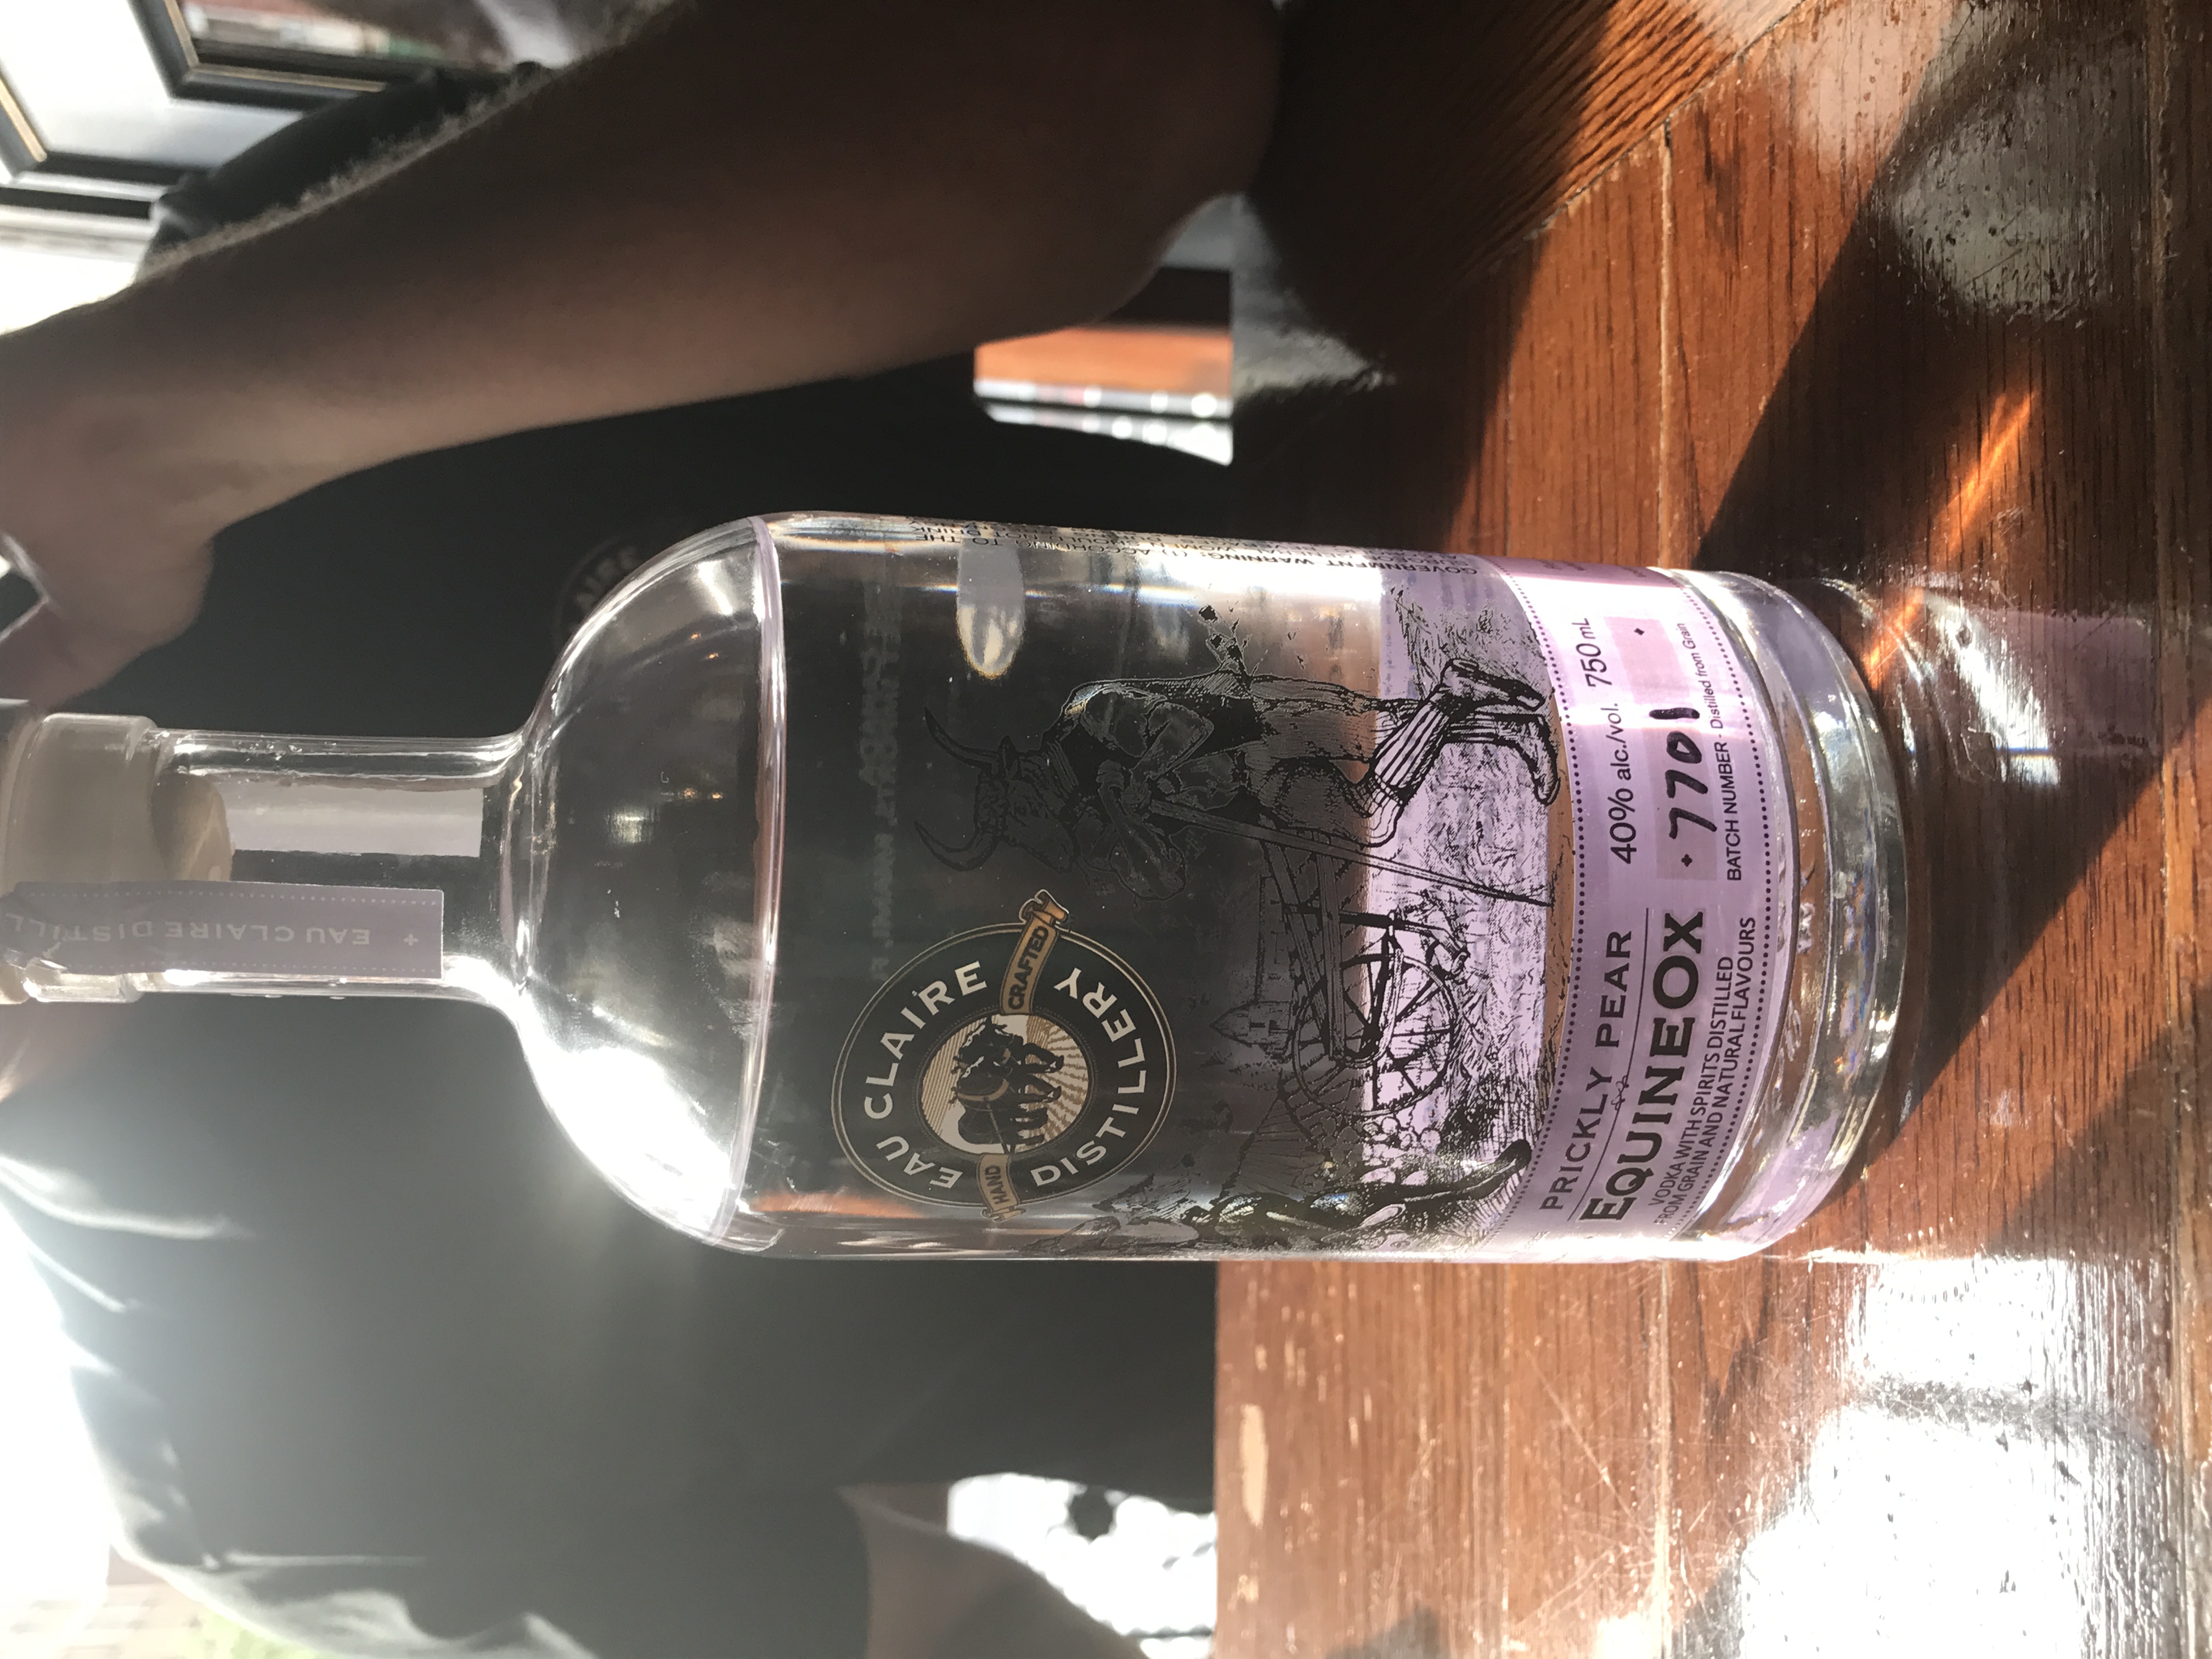 Craft Canadian Eau Claire Gin Launches